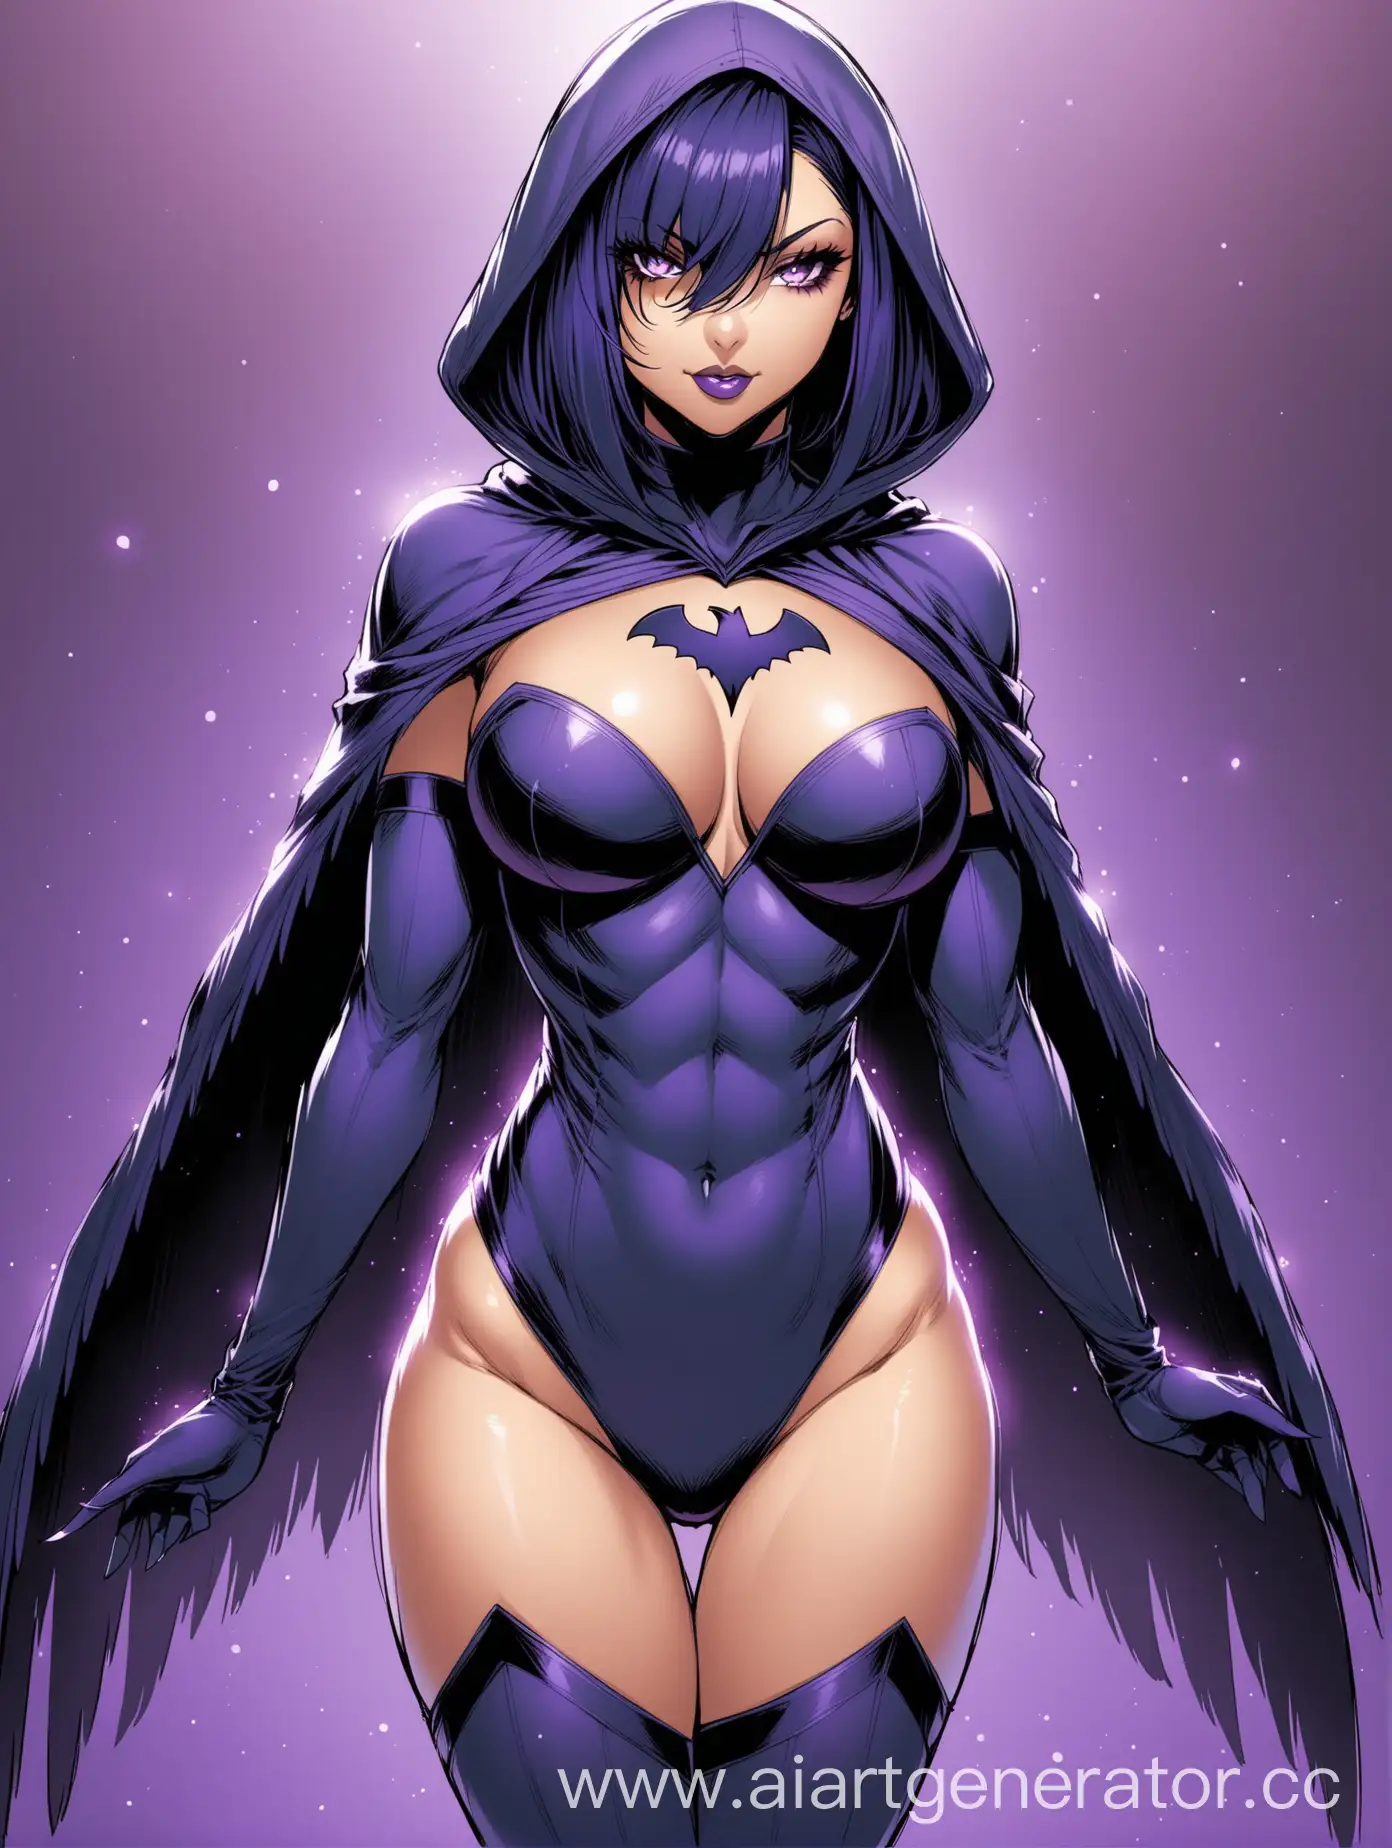 Raven from DC, perfect body, sexy costume